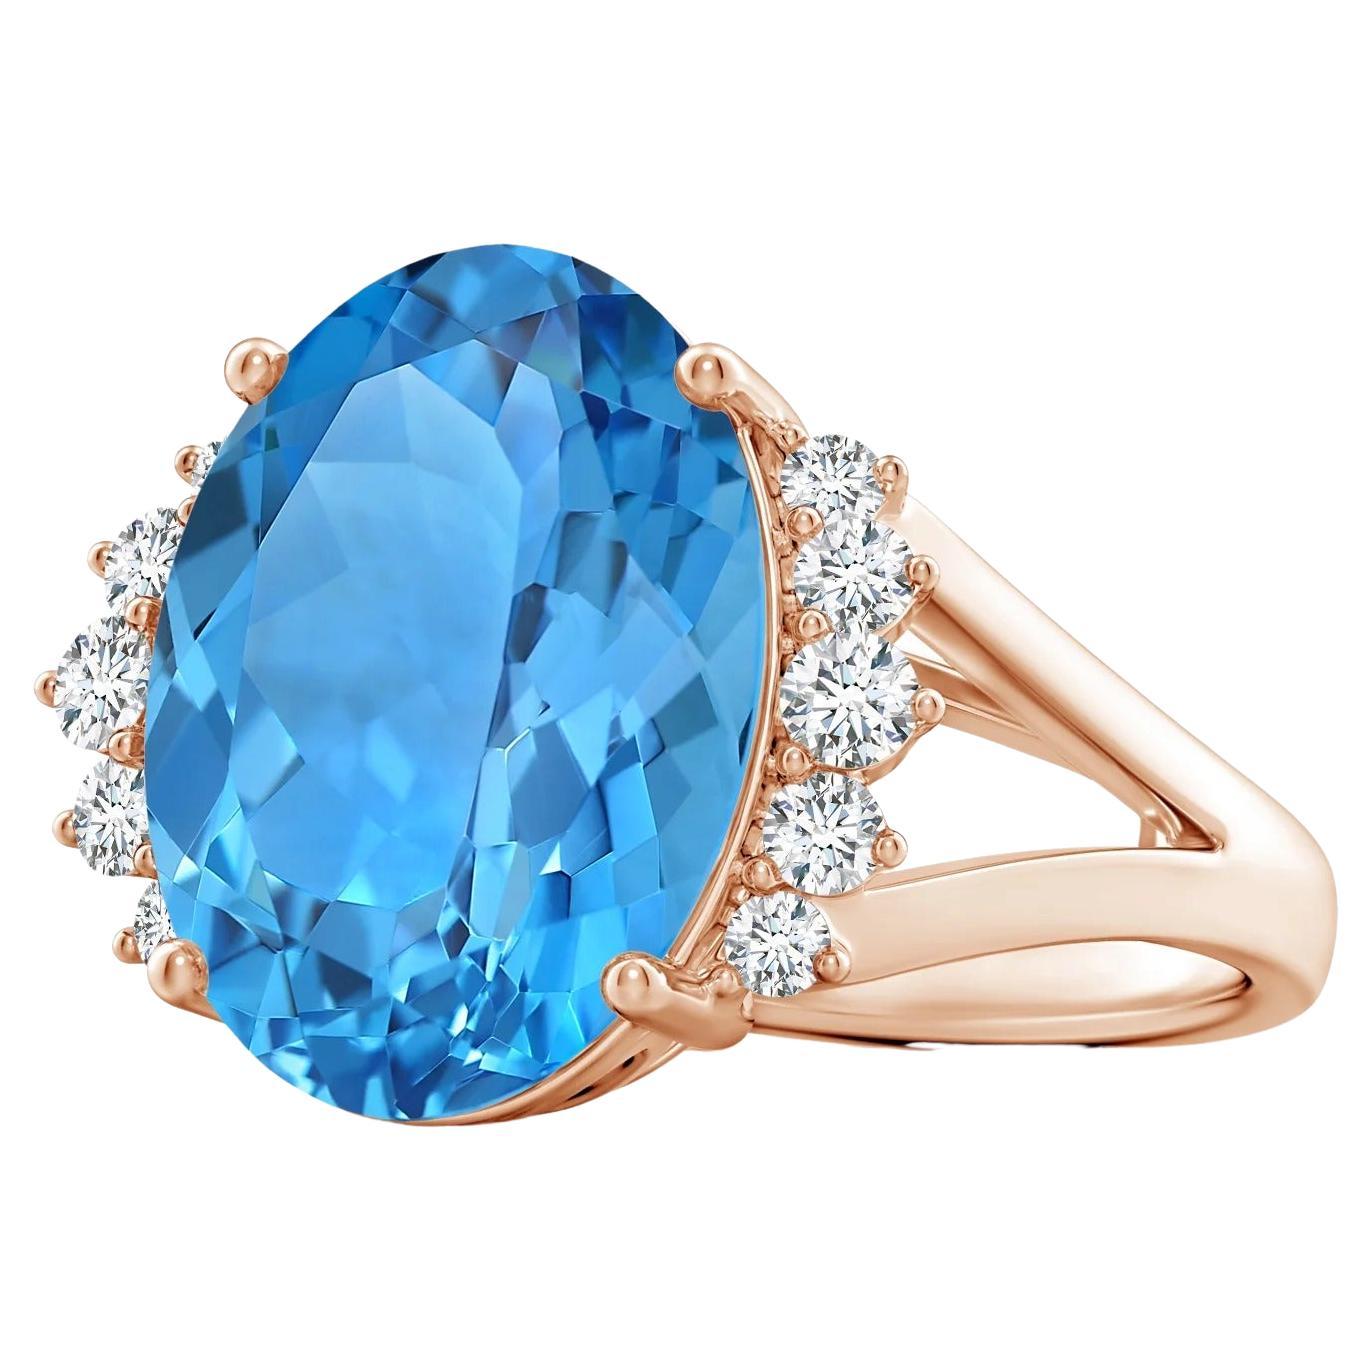 For Sale:  GIA Certified Swiss Blue Topaz Ring in Rose Gold with Side Diamonds